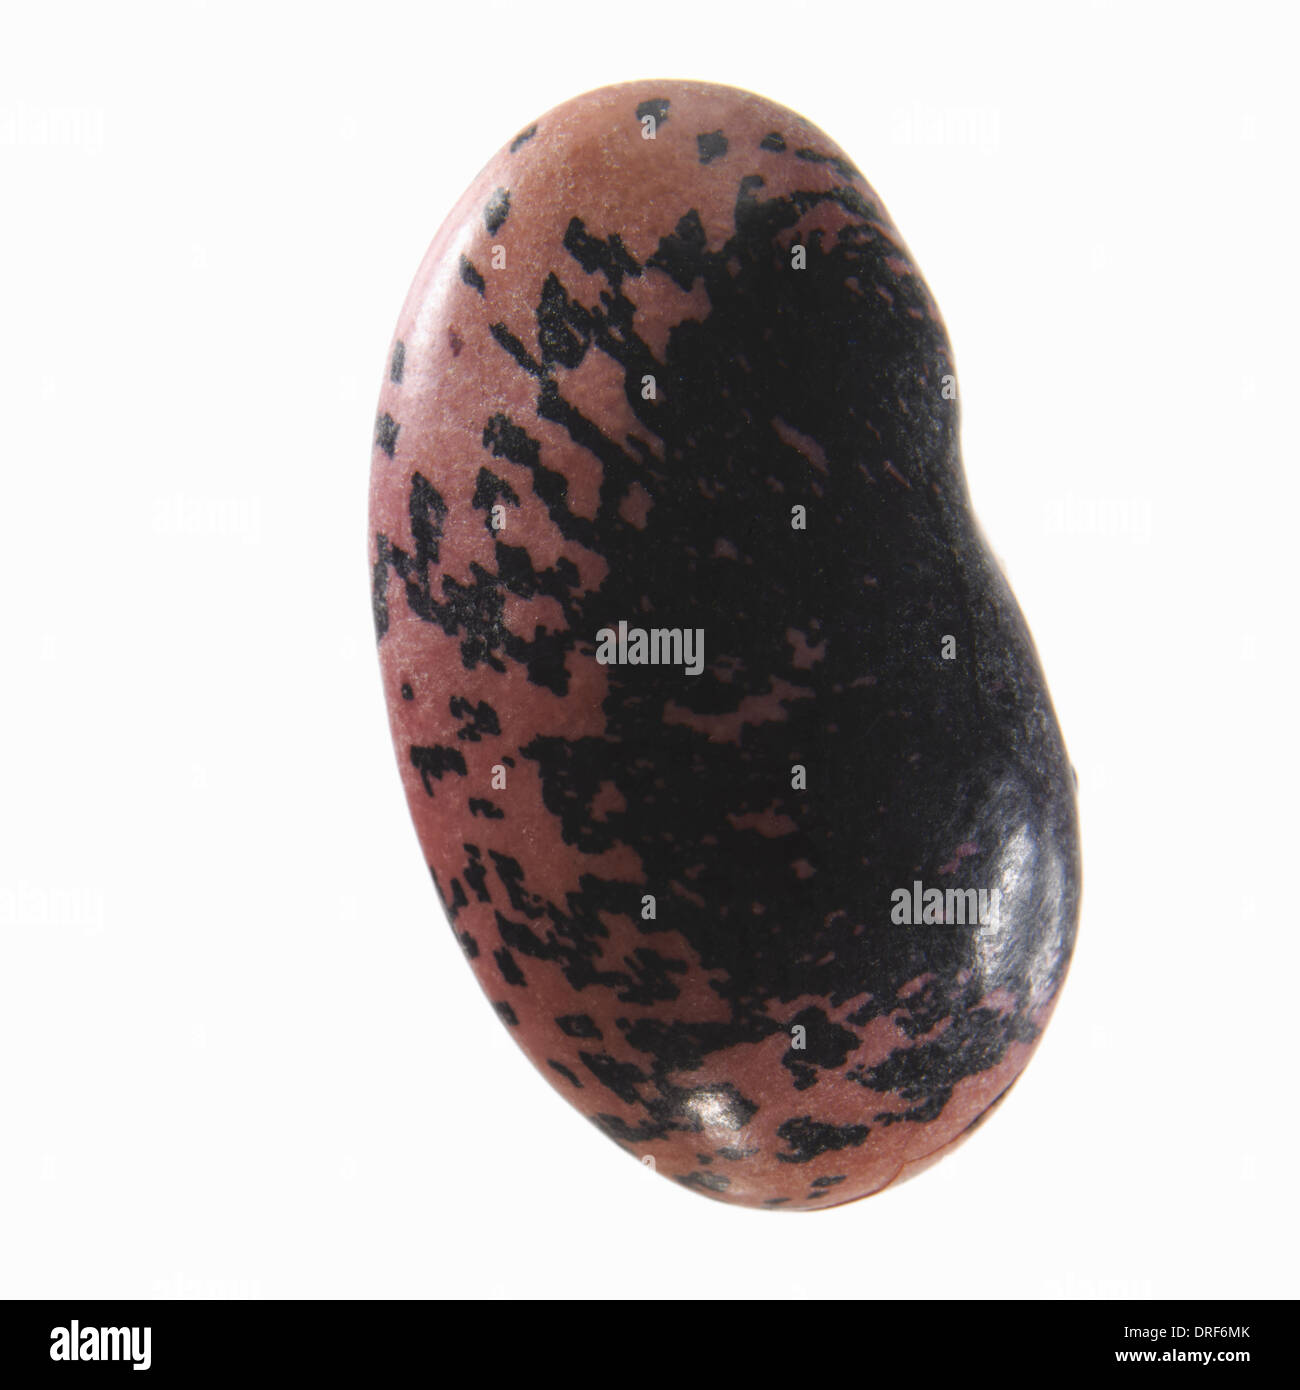 kidney bean with red and black pattern on skin Stock Photo